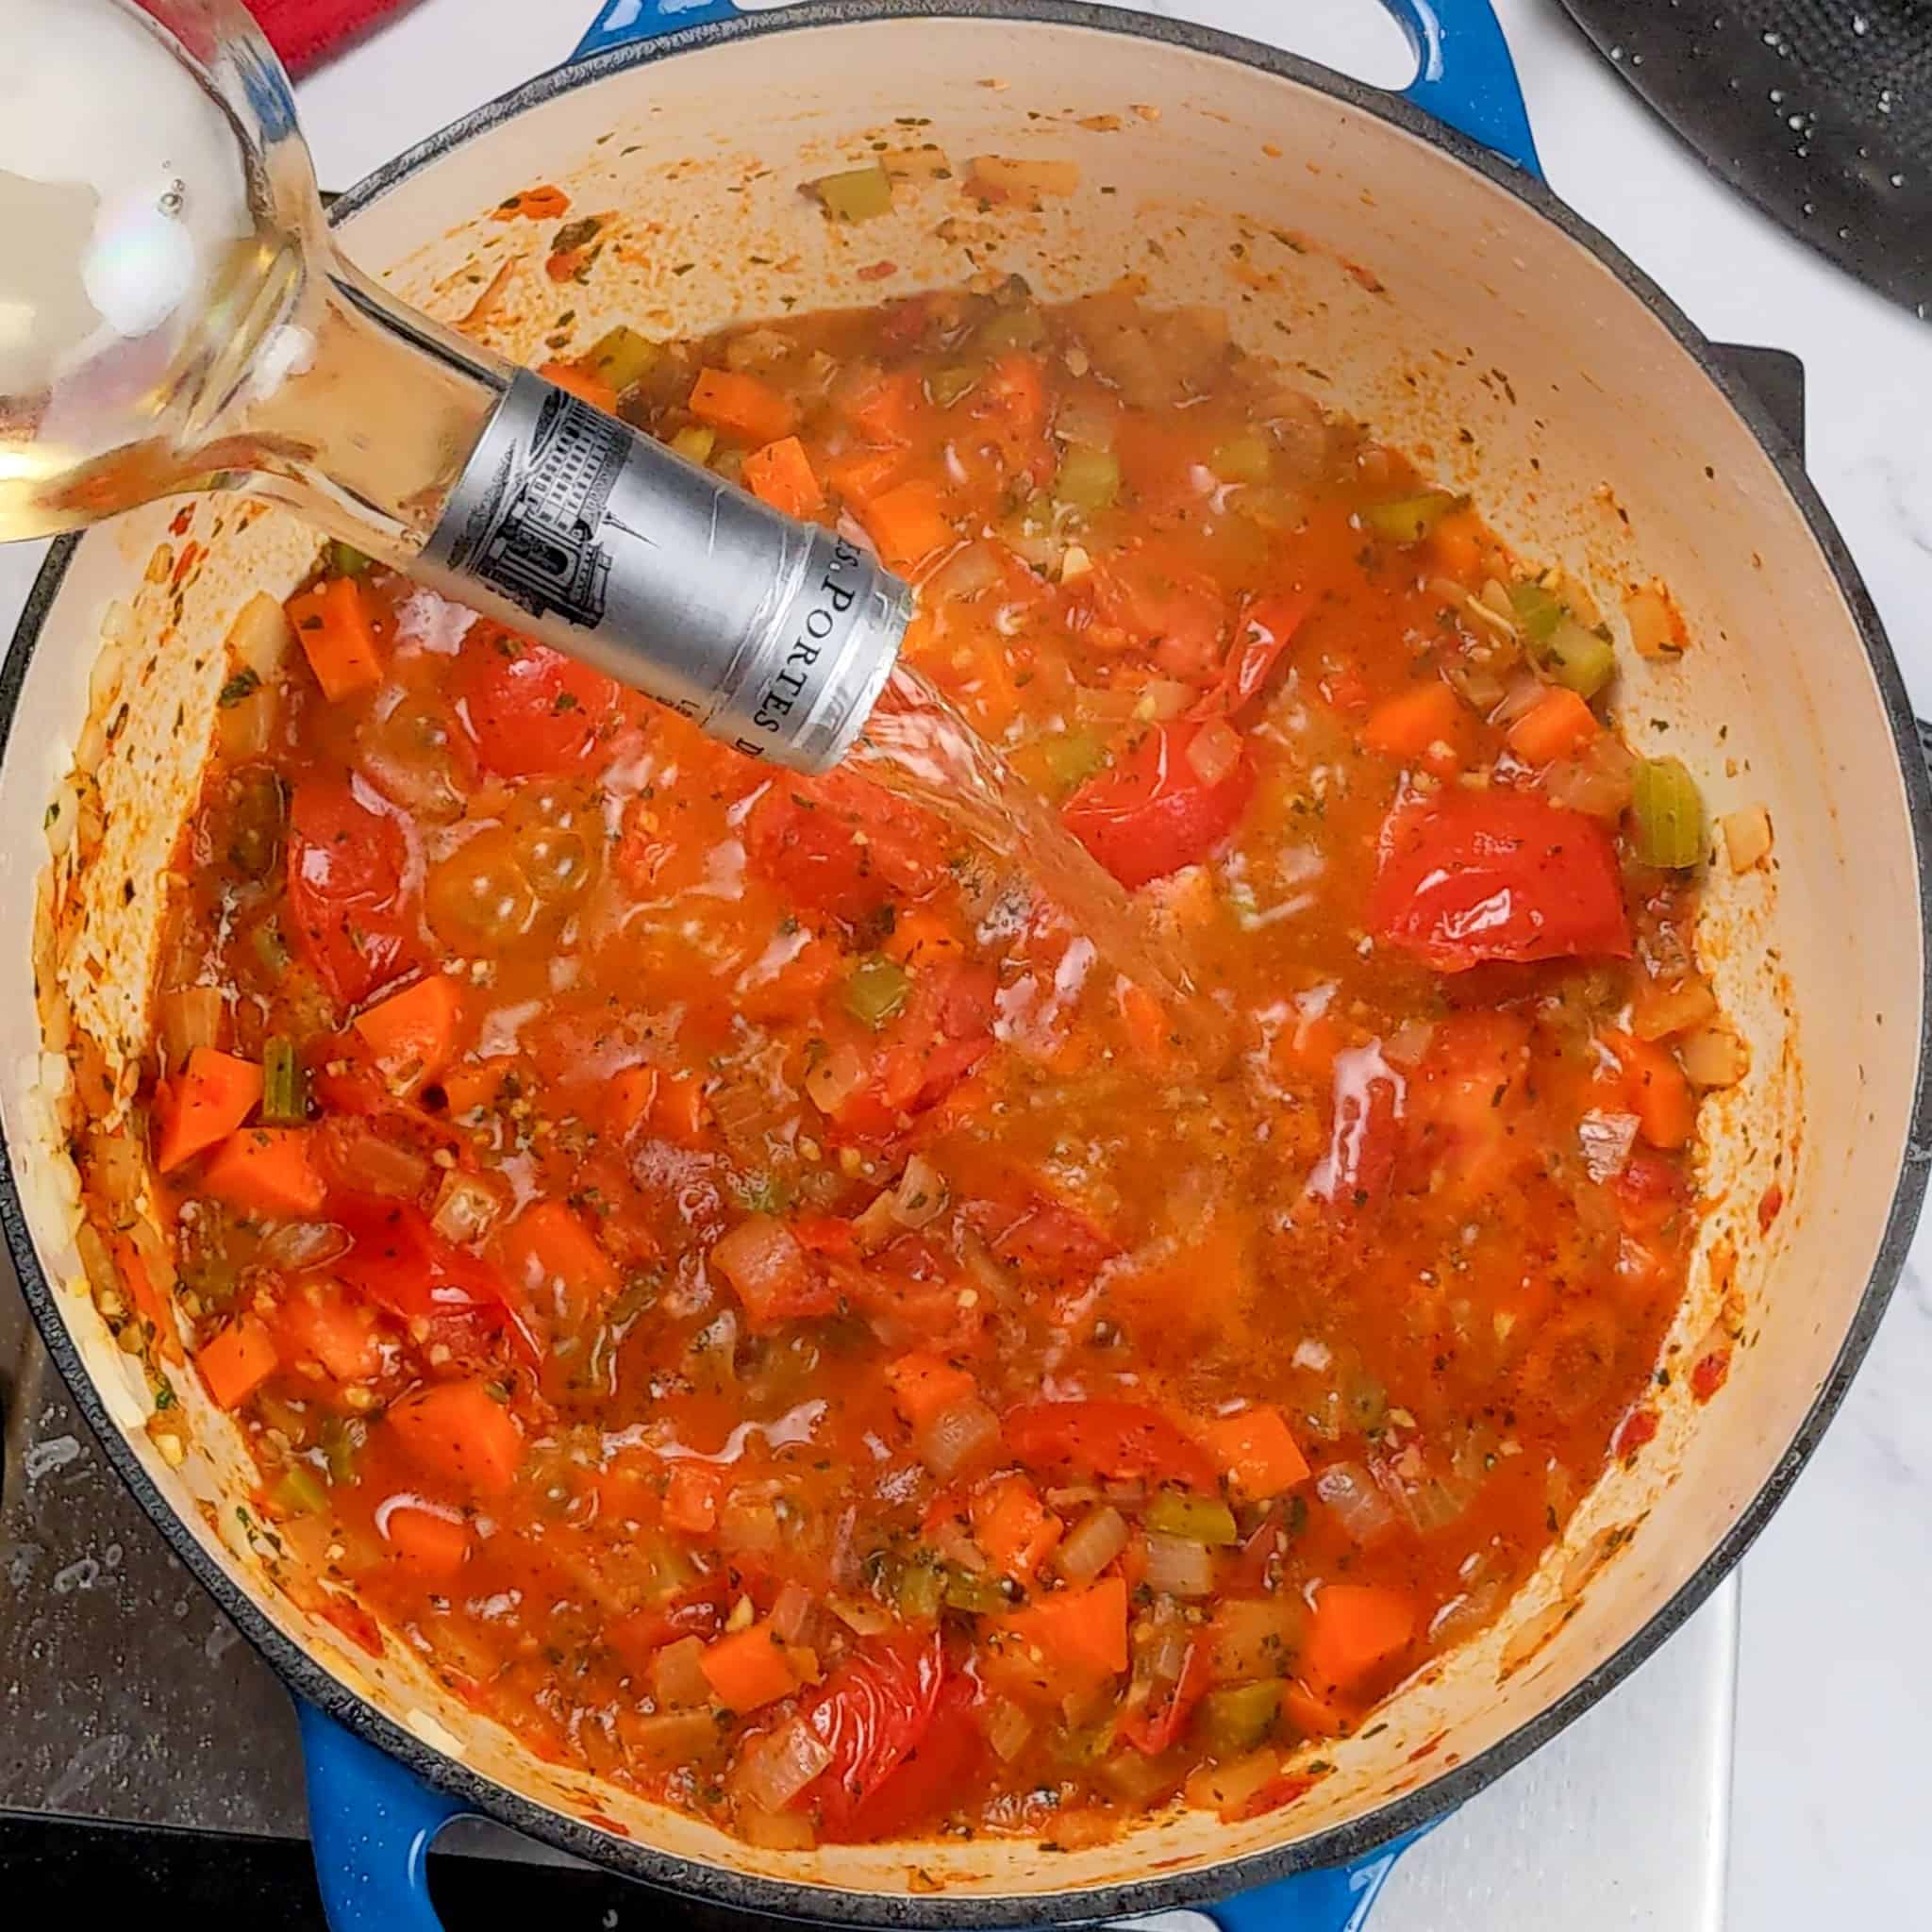 white wine being poured into cooked down campari tomatoes mixed in with herbs and mirepoix in an enameled dutch oven.